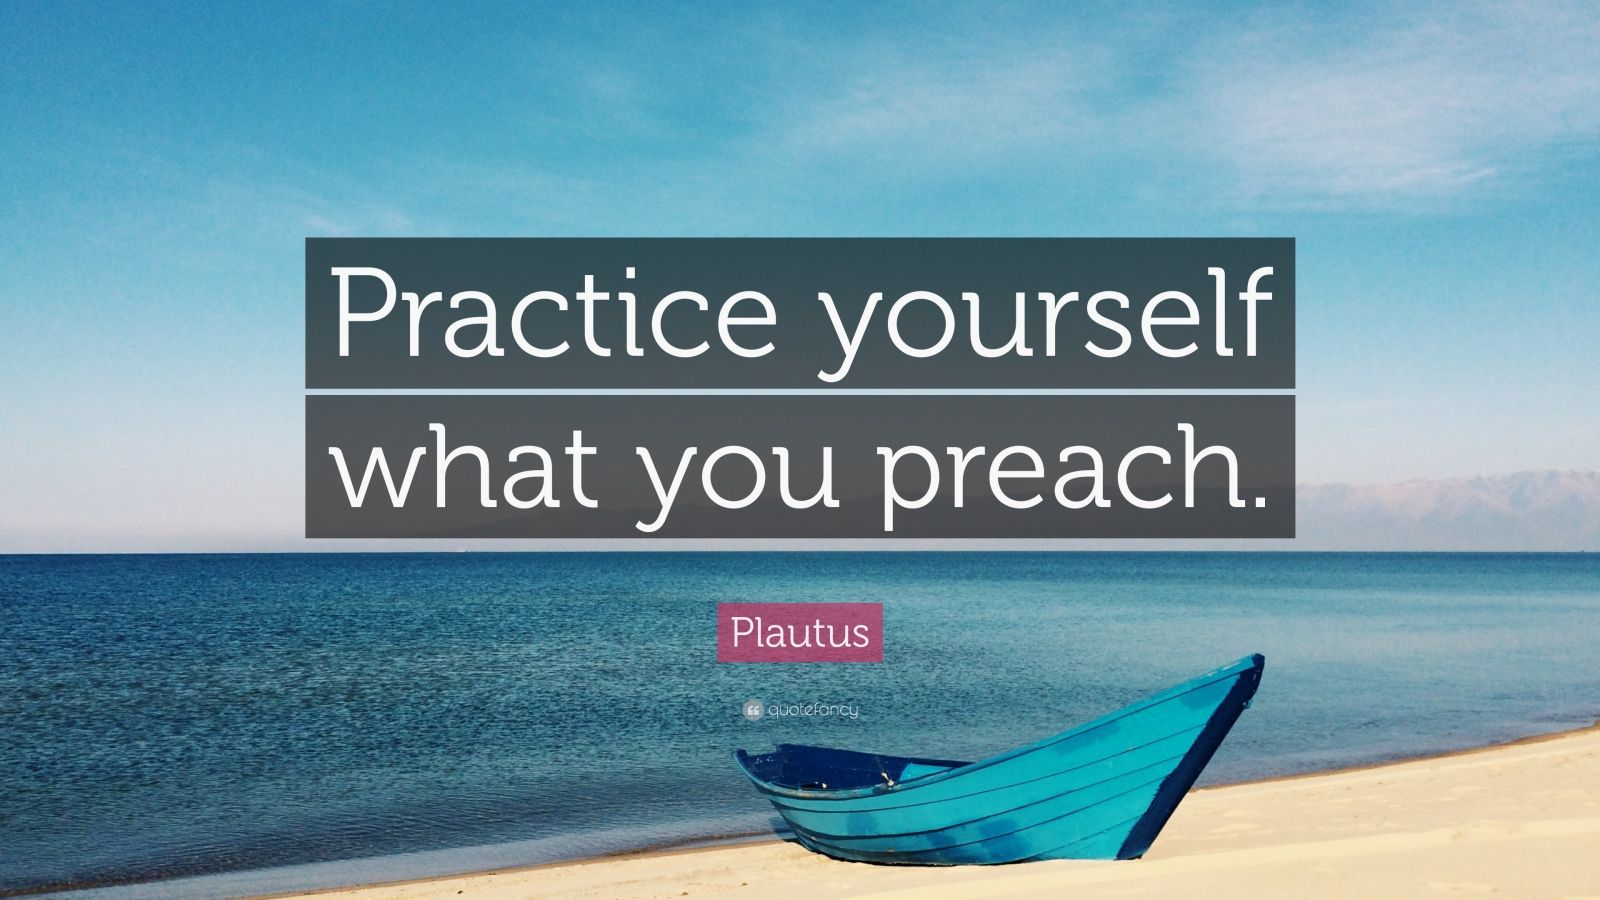 Plautus Quote: "Practice yourself what you preach." (12 ...